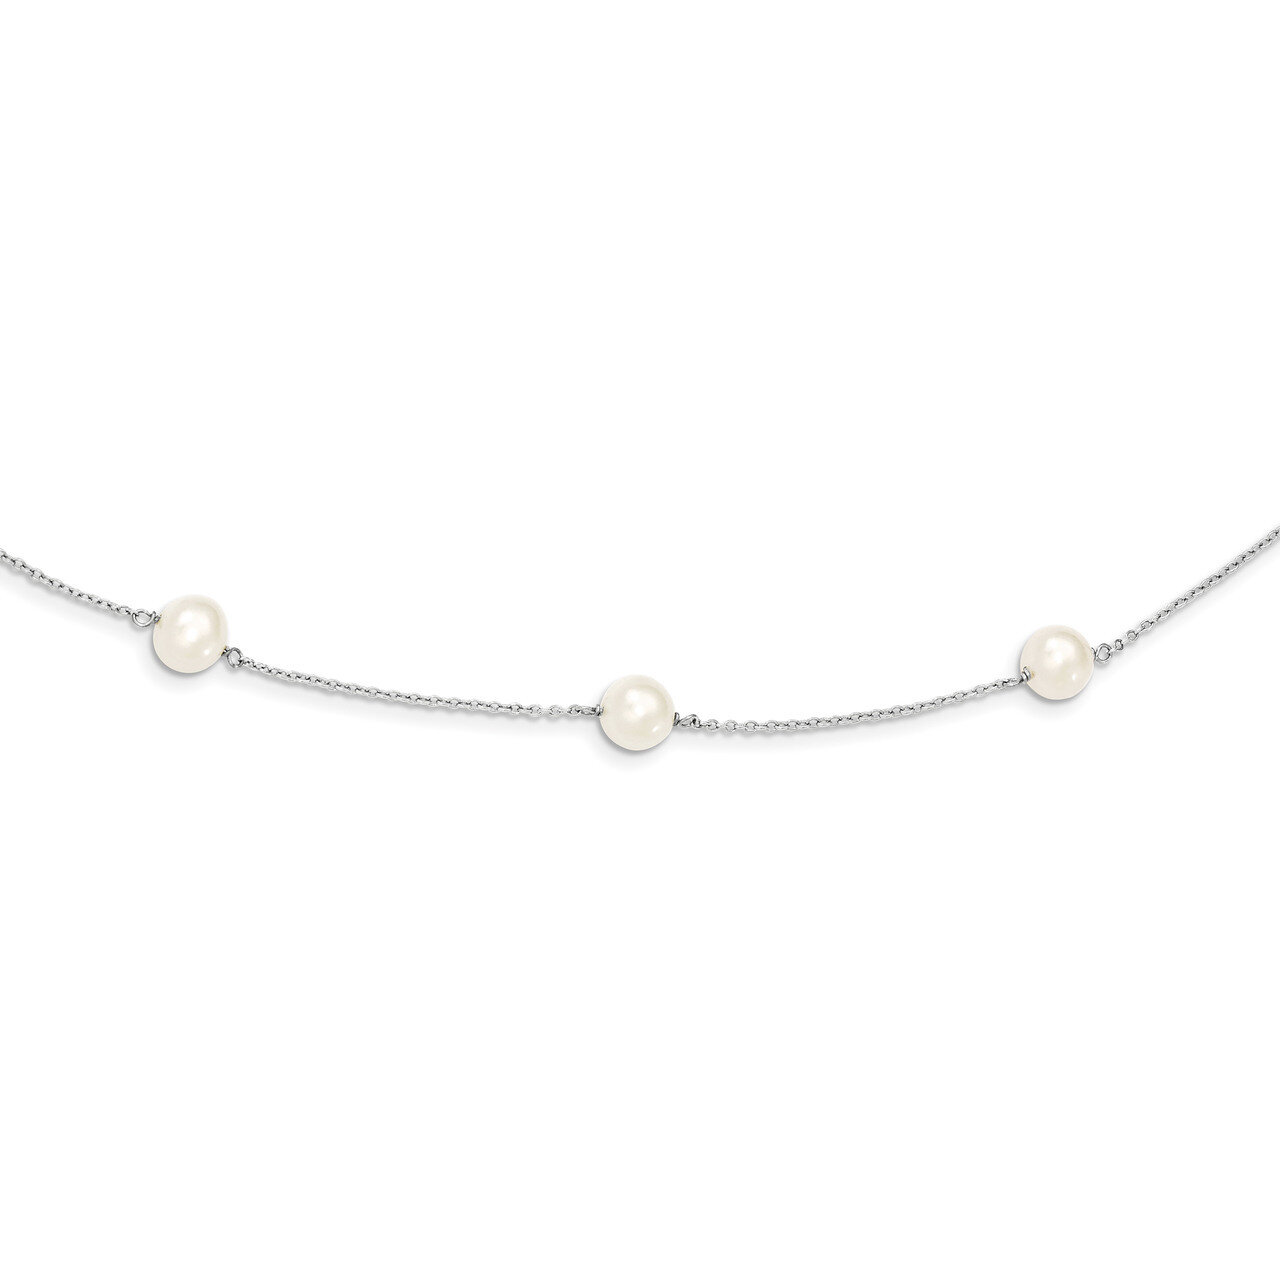 7-8mm Freshwater Cultured 9 Station Pearl Necklace 18 Inch Sterling Silver QH5236-18